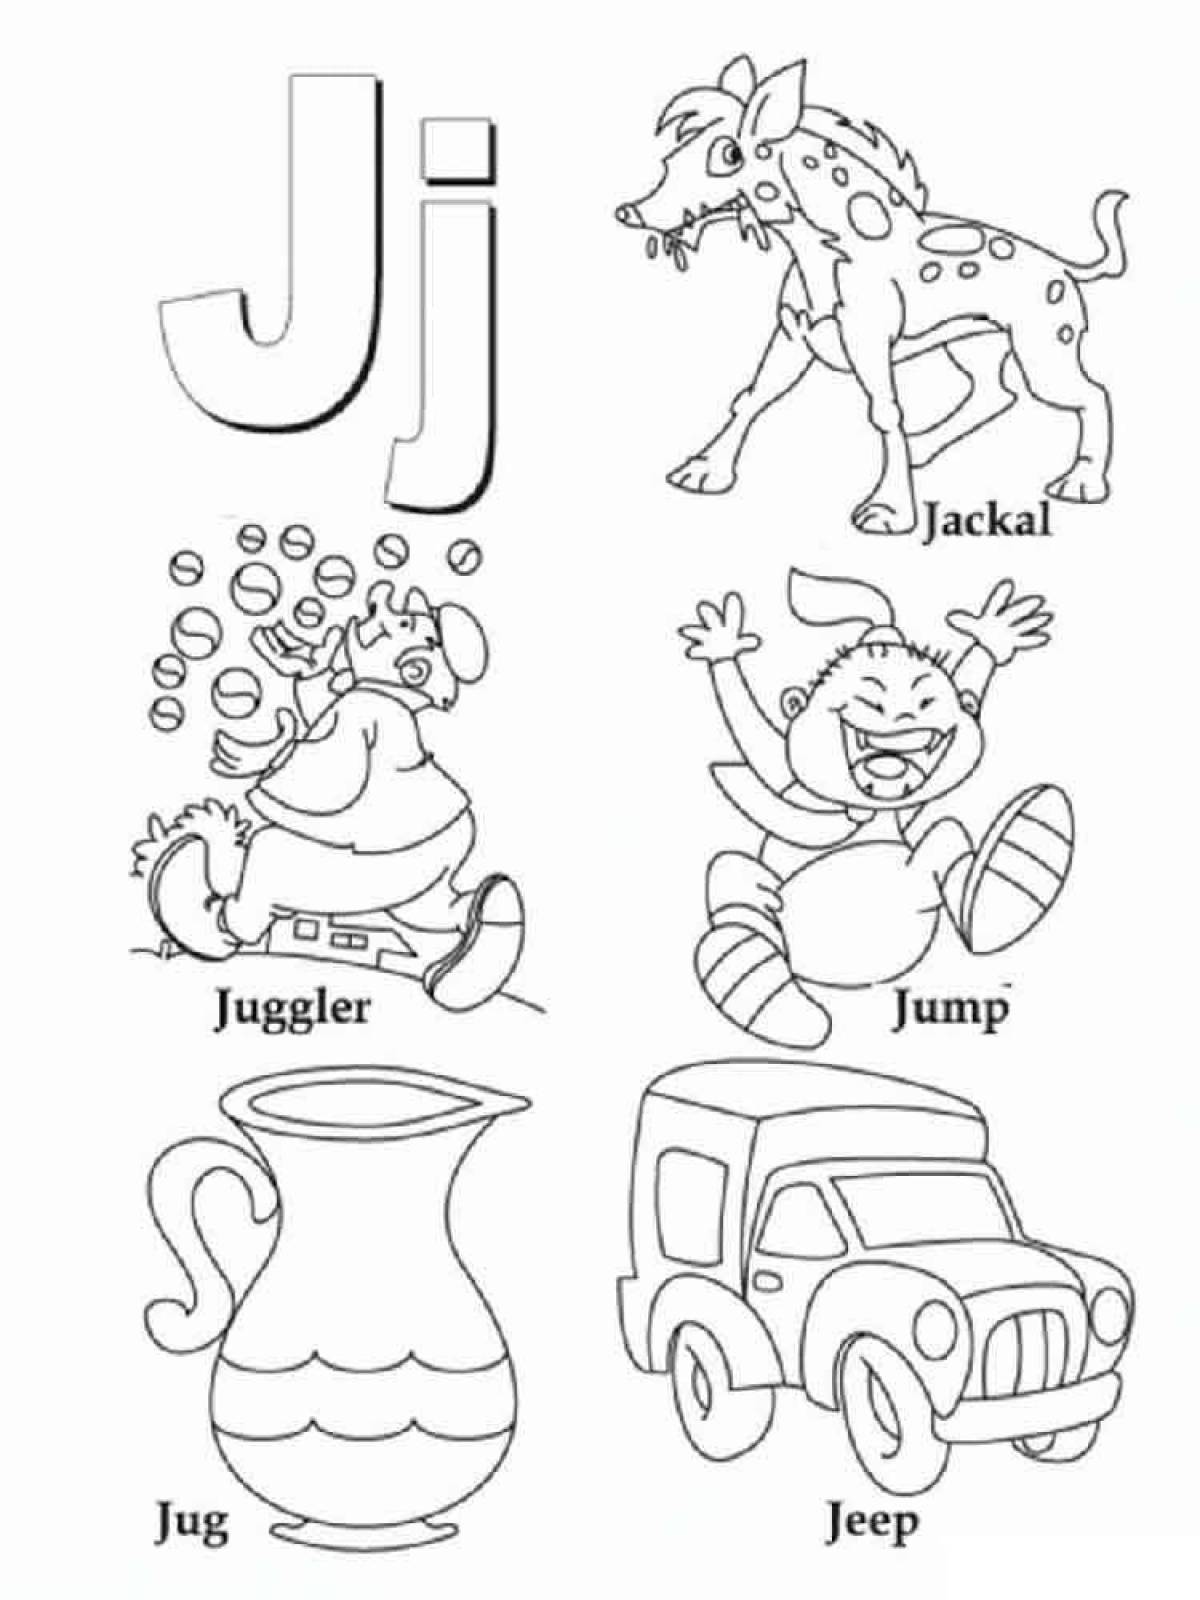 Stimulating knowledge of the alphabet english coloring page